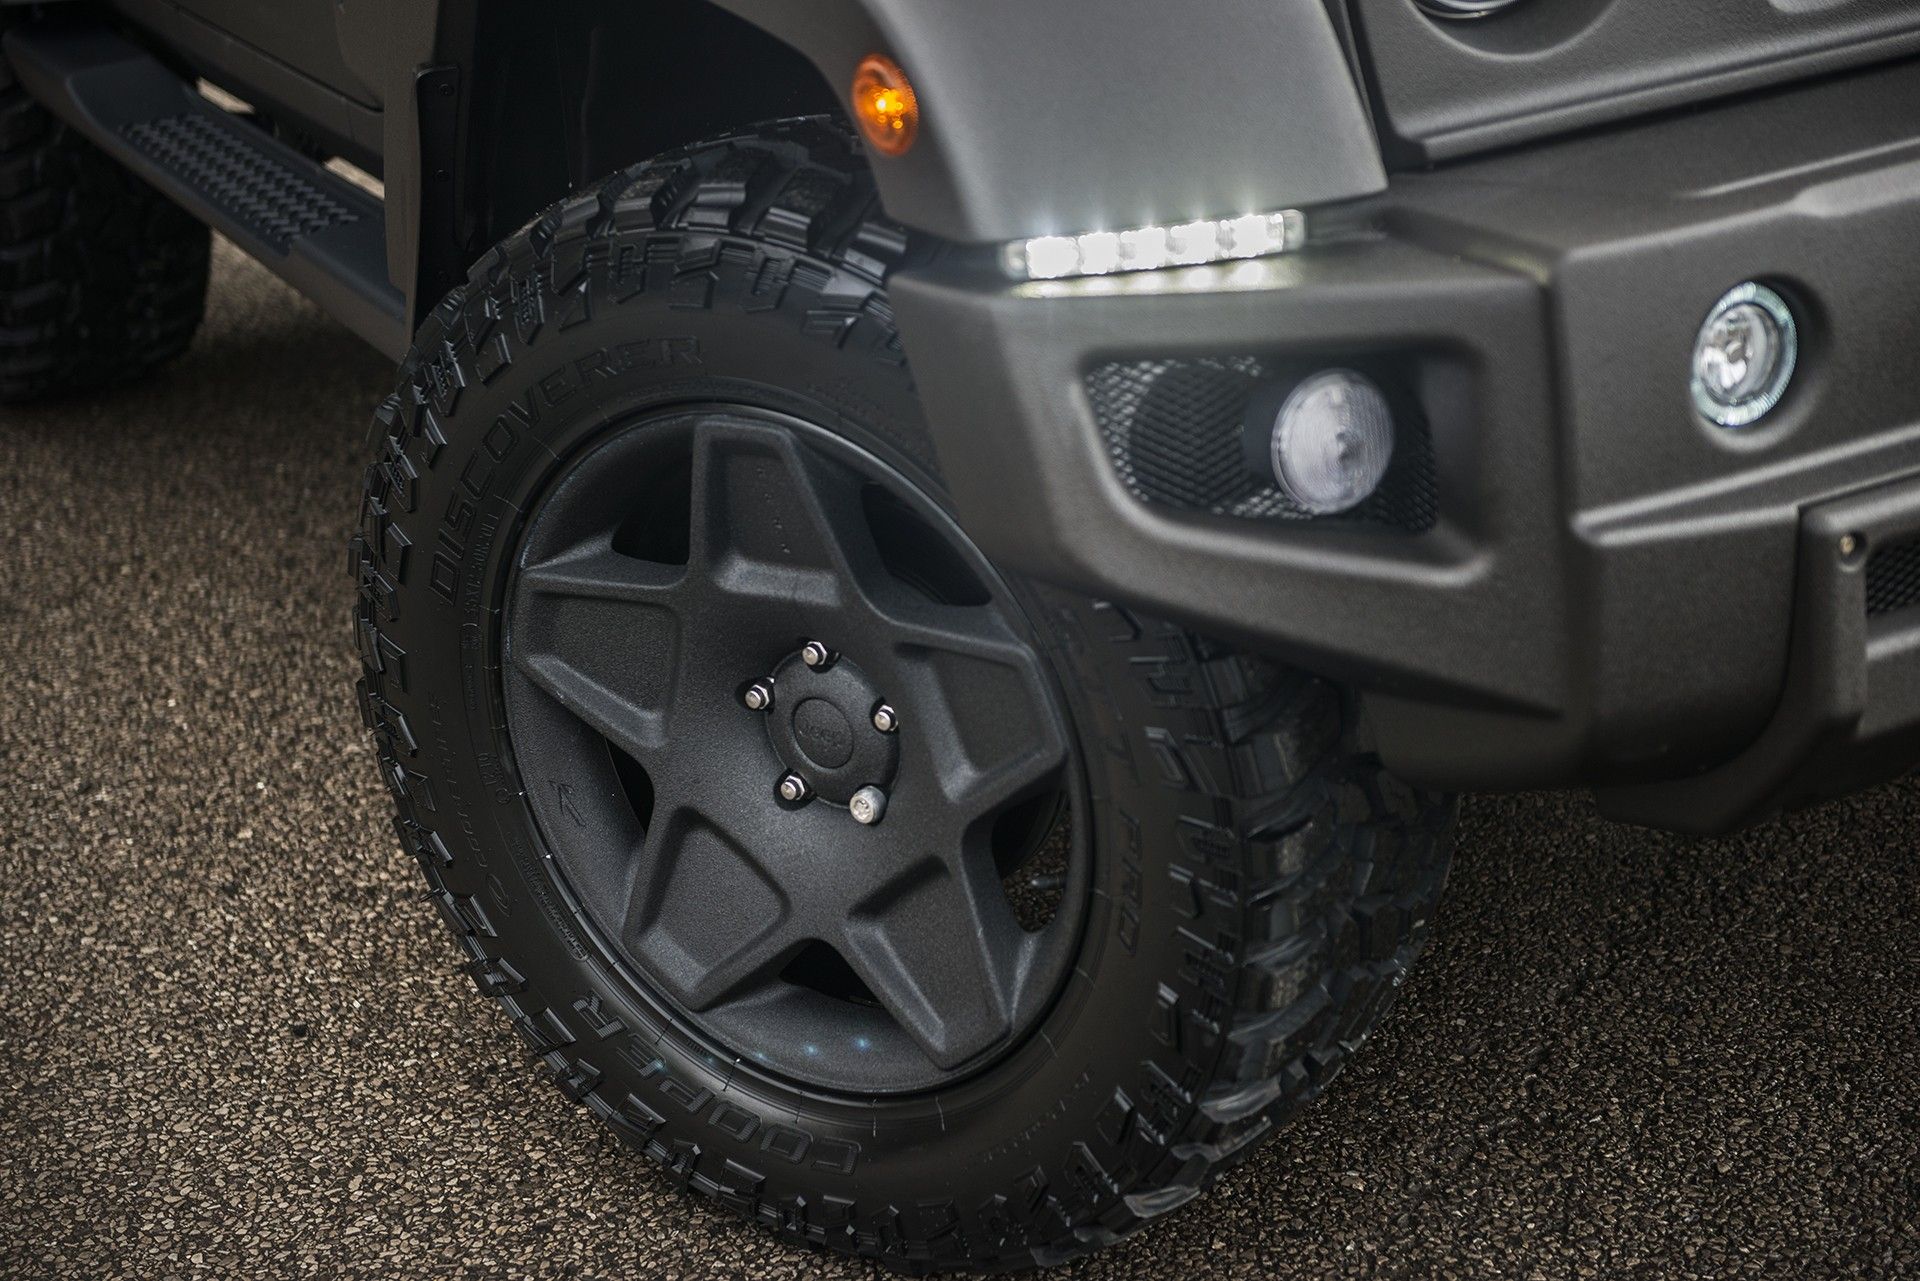 2021 Jeep Wrangler Black Hawk Expedition by Chelsea Truck Company